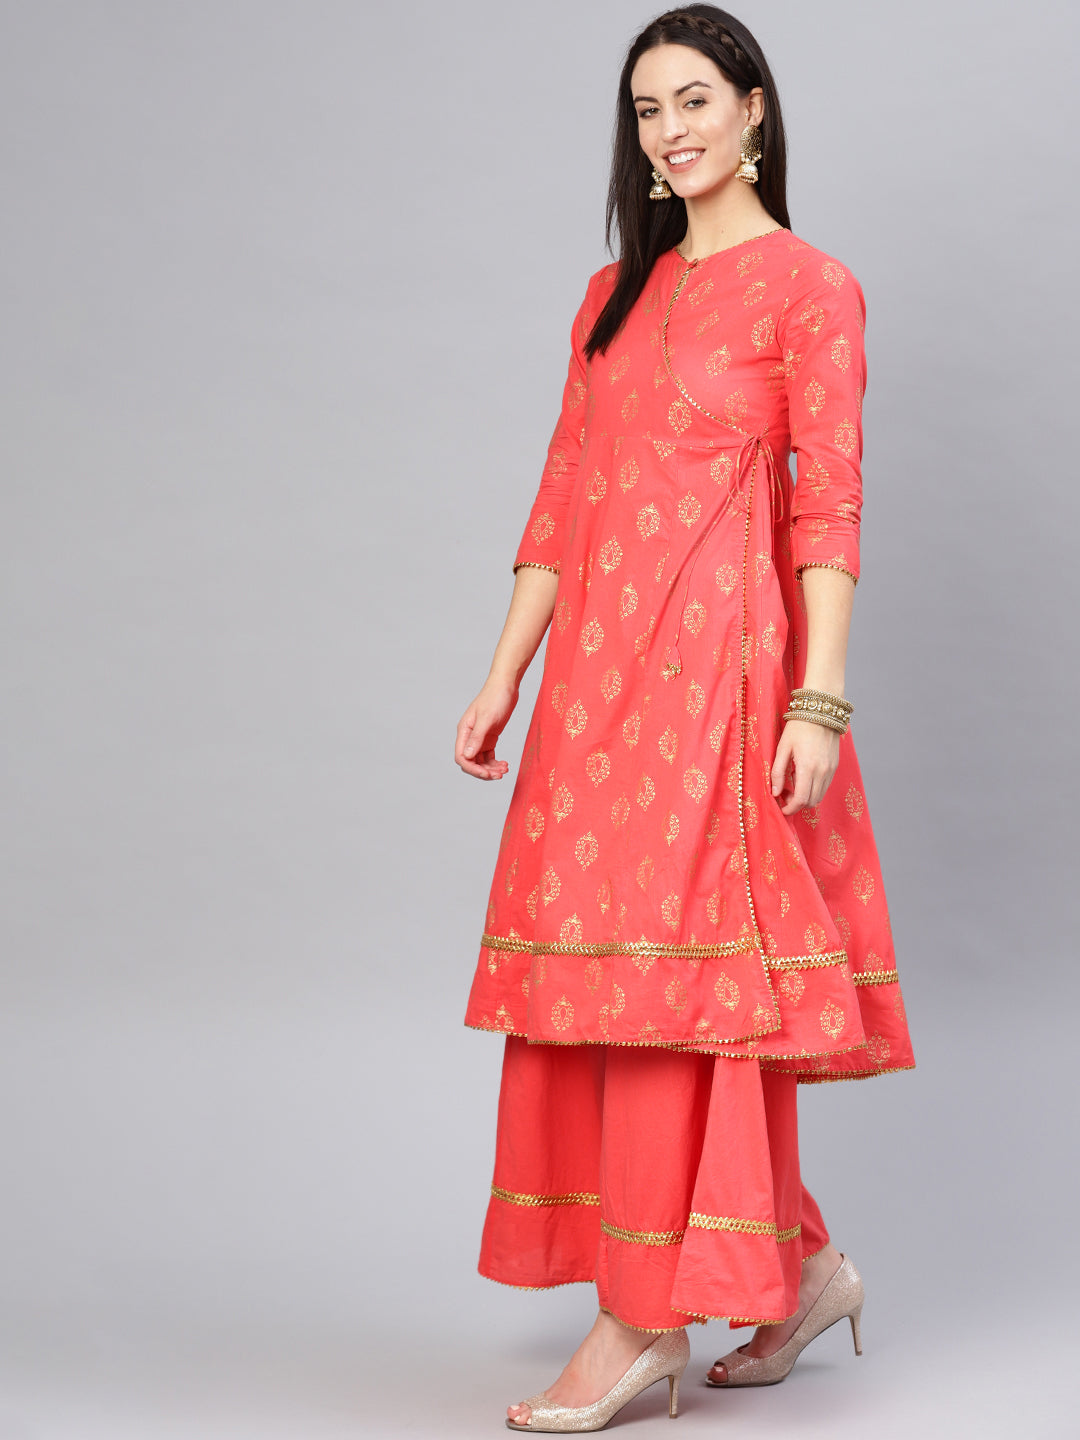 Women's Peach And Golden Printed Kurta With Palazzos - Bhama Couture